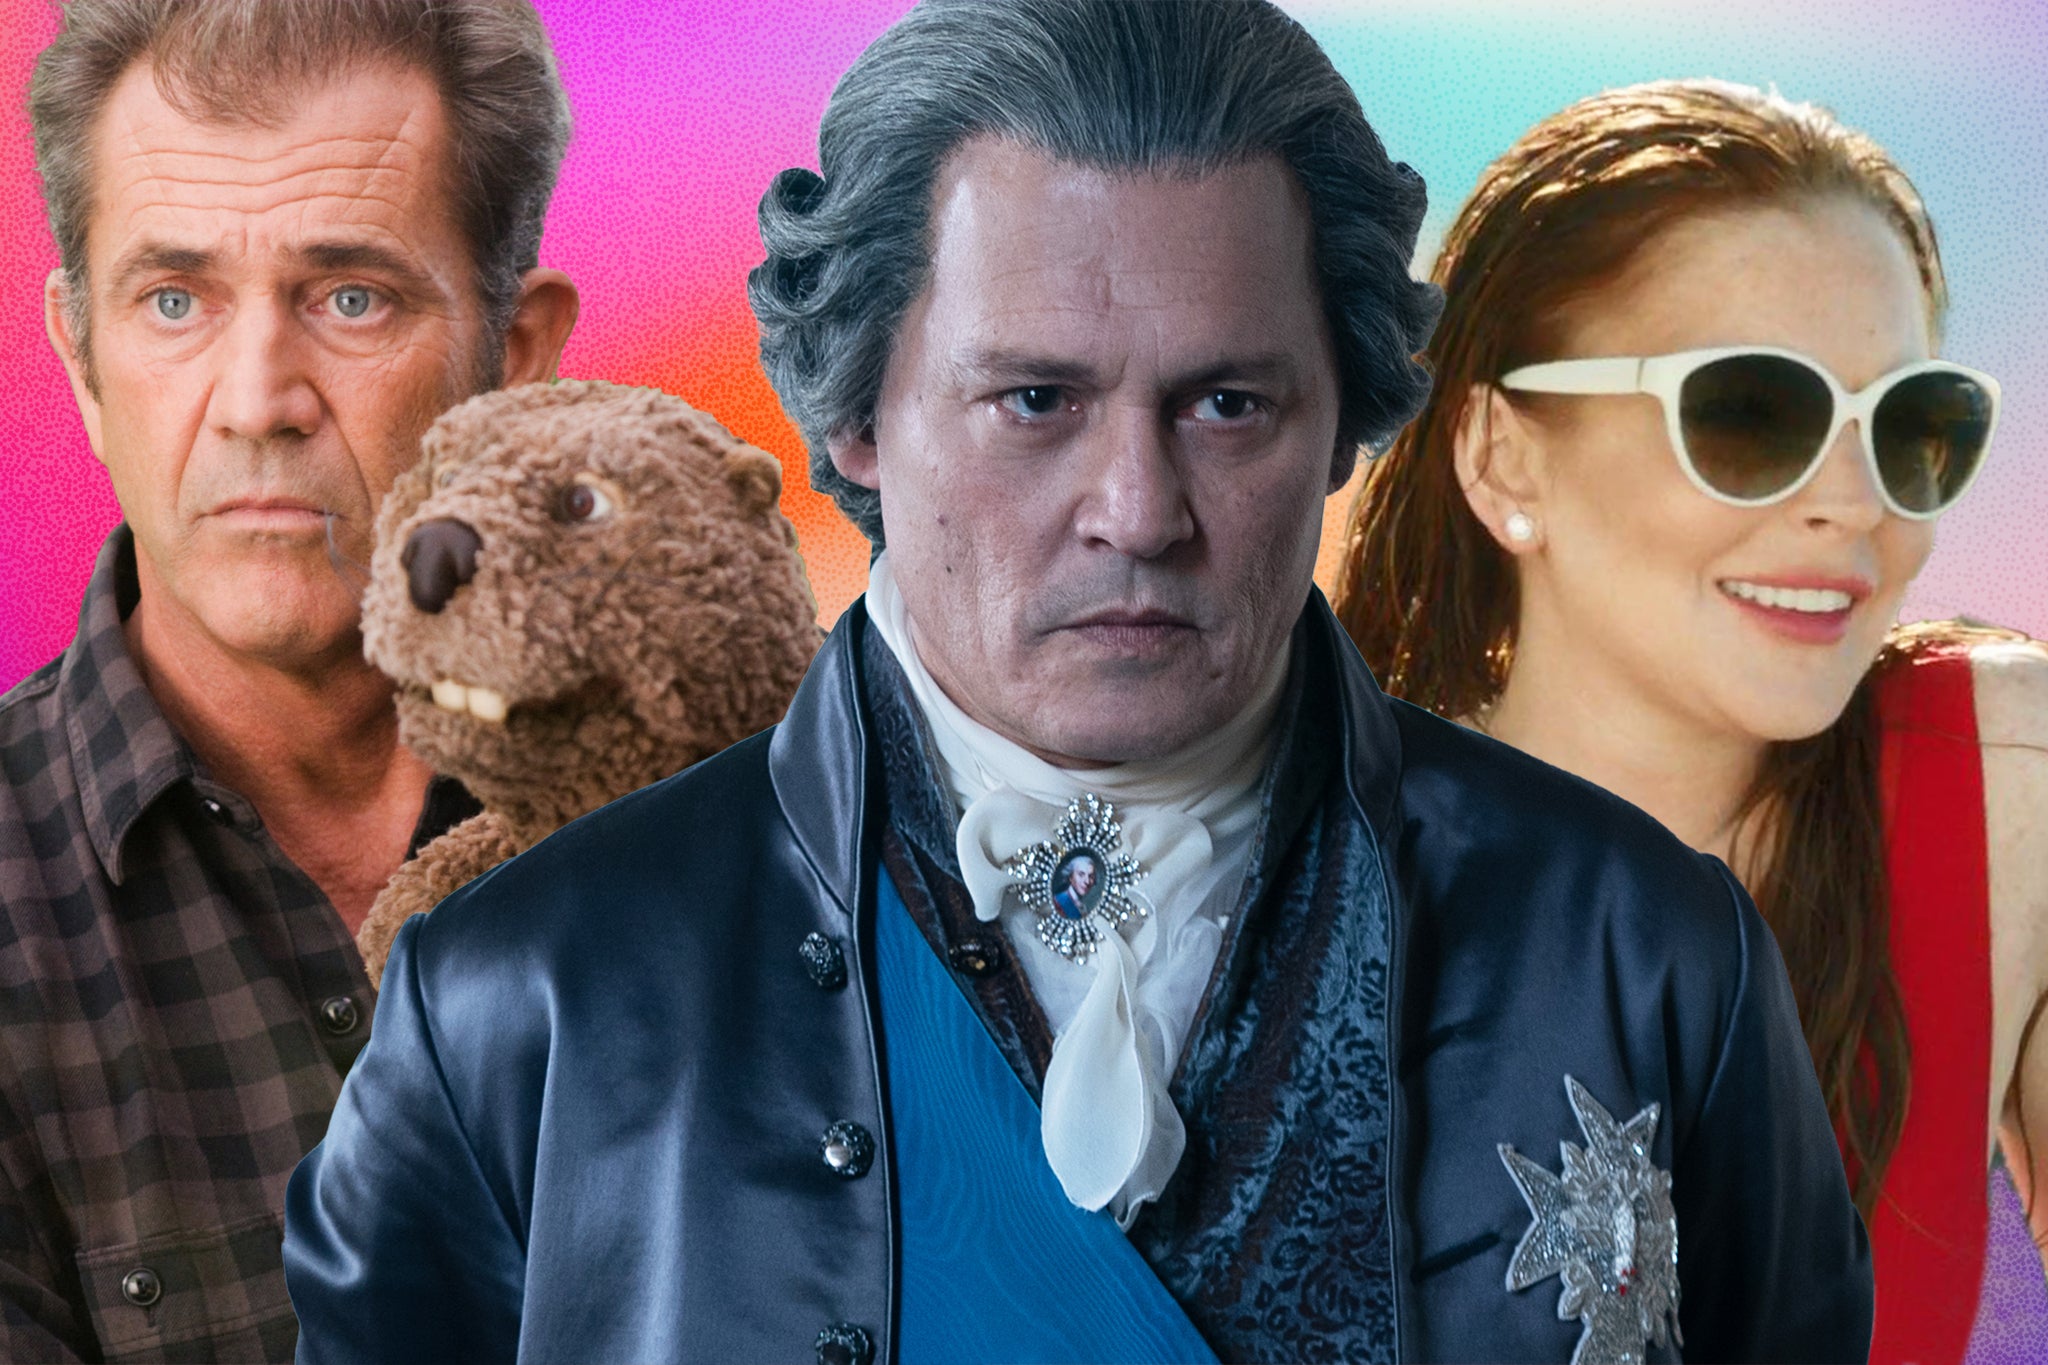 Don’t call it a comeback: Mel Gibson in ‘The Beaver’, Johnny Depp in ‘Jeanne du Barry’ and Lindsay Lohan in ‘The Canyons’